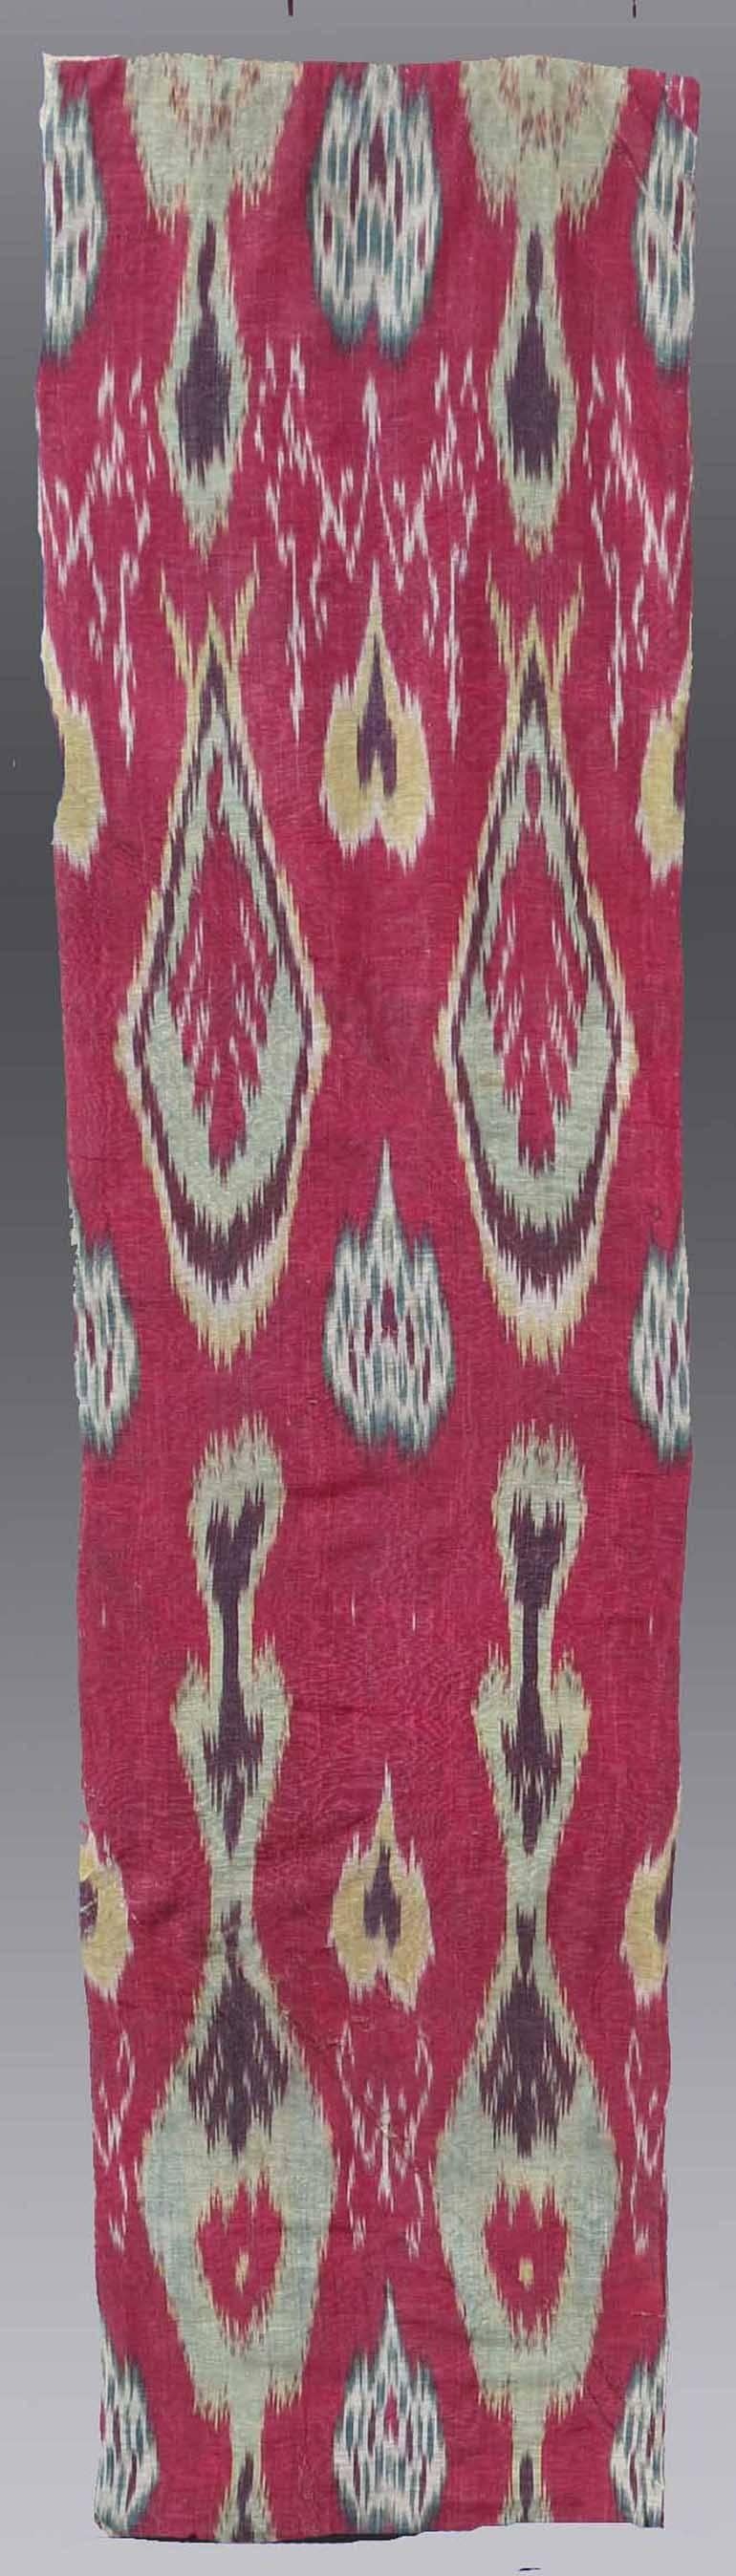 The process of Ikat weaving is fascinating as each individual silk thread is dyed before the weaving process. The strands of silk are tied off and dip dyed in different dye baths, yielding multiple colors on a single strand of silk. Upon weaving,